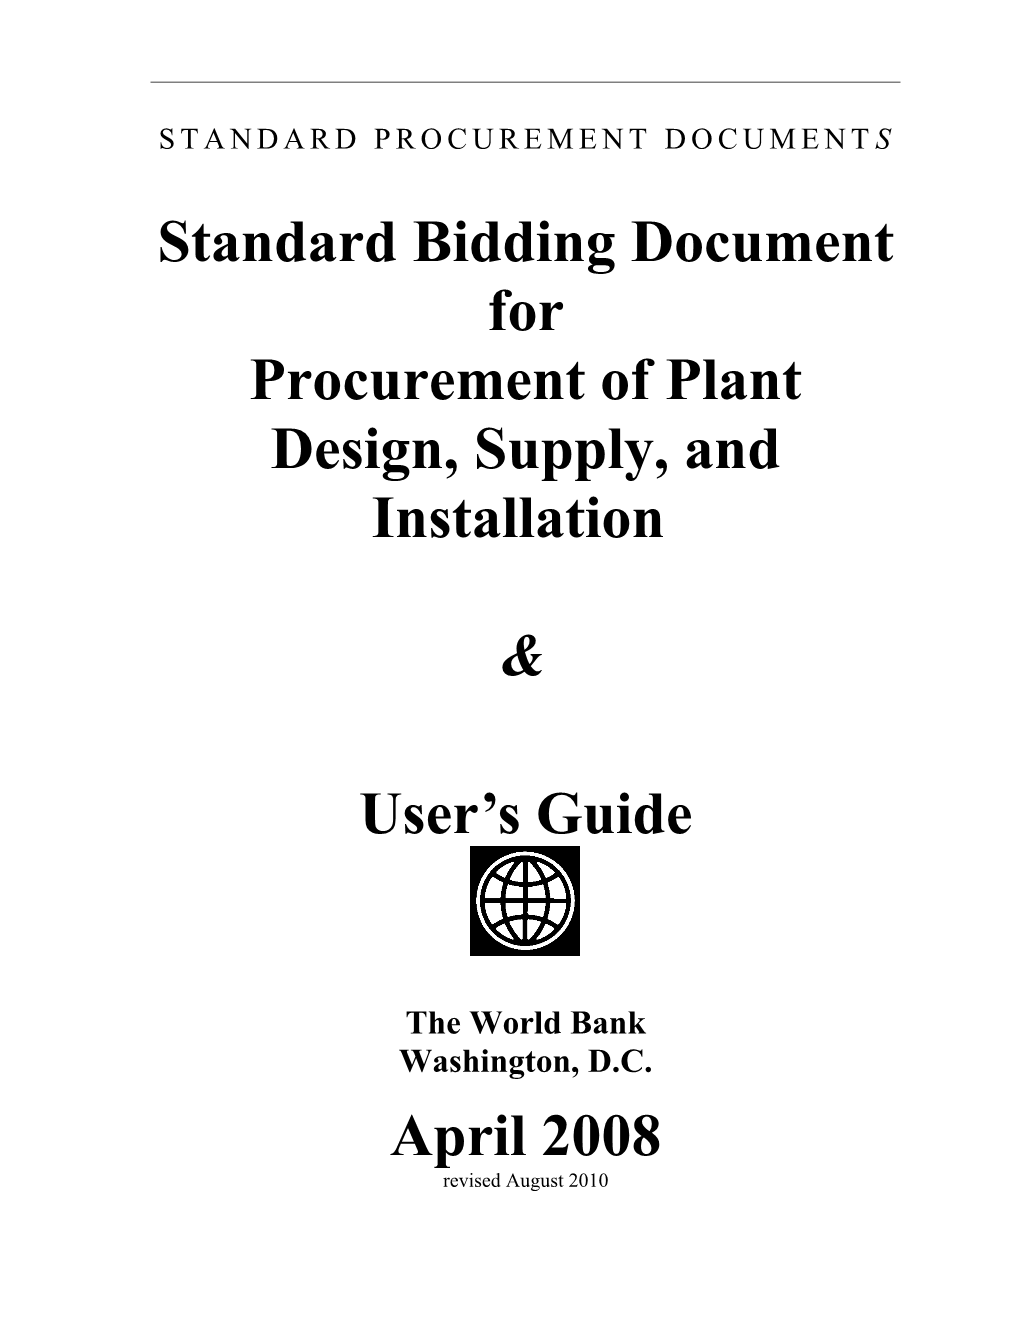 Standard Bidding Document for Procurement of Plant Design,Supply, and Installation